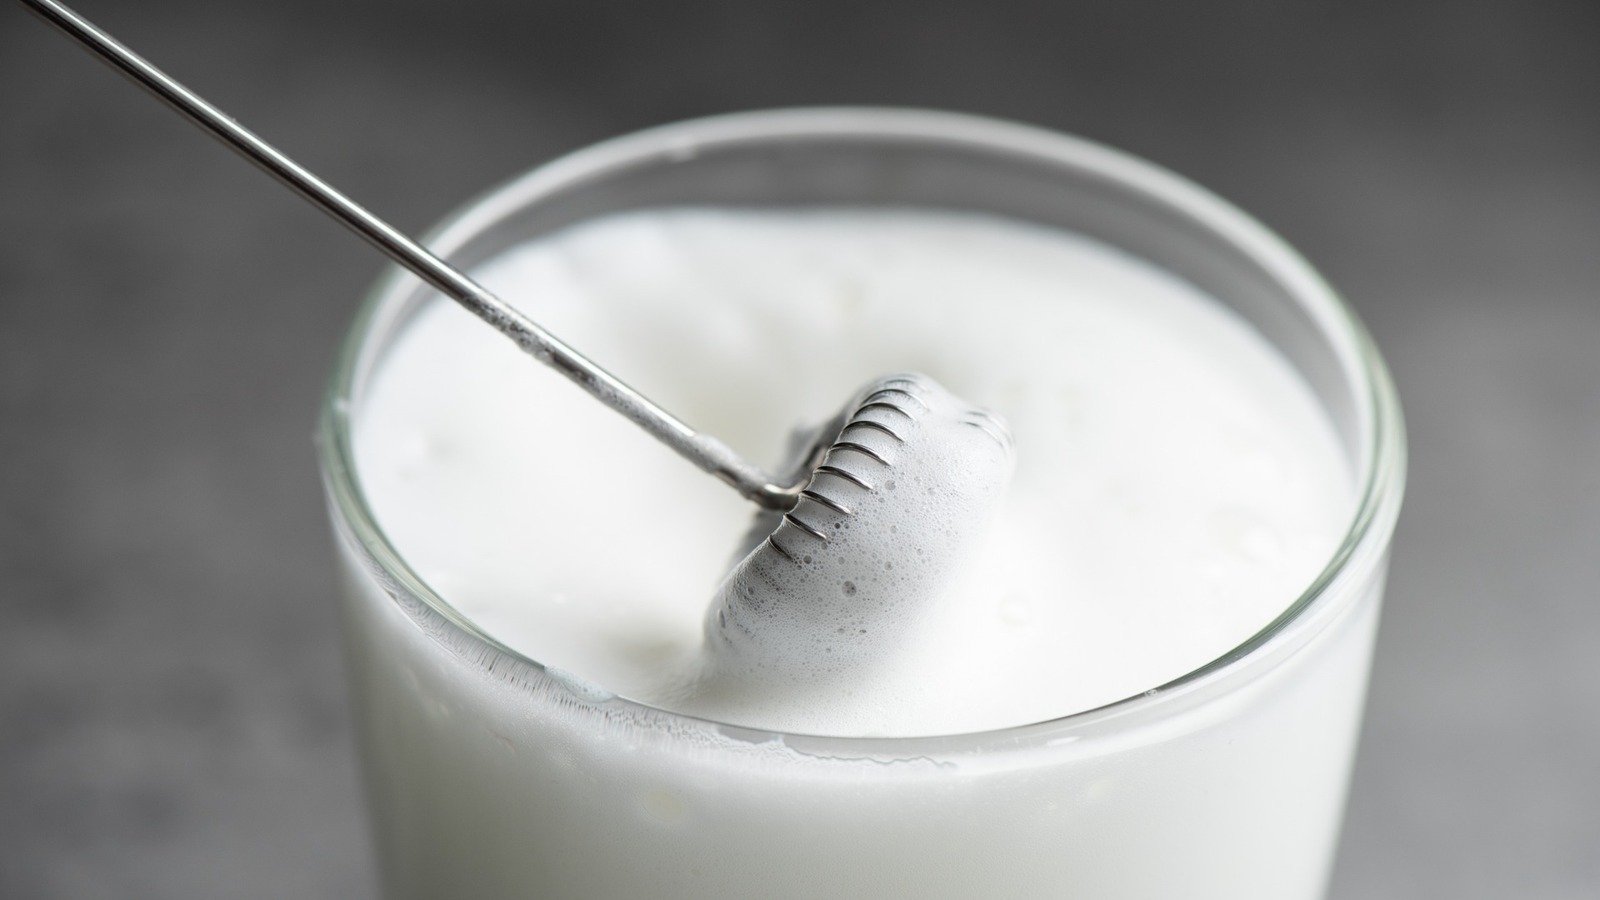 How to Clean a Milk Frother